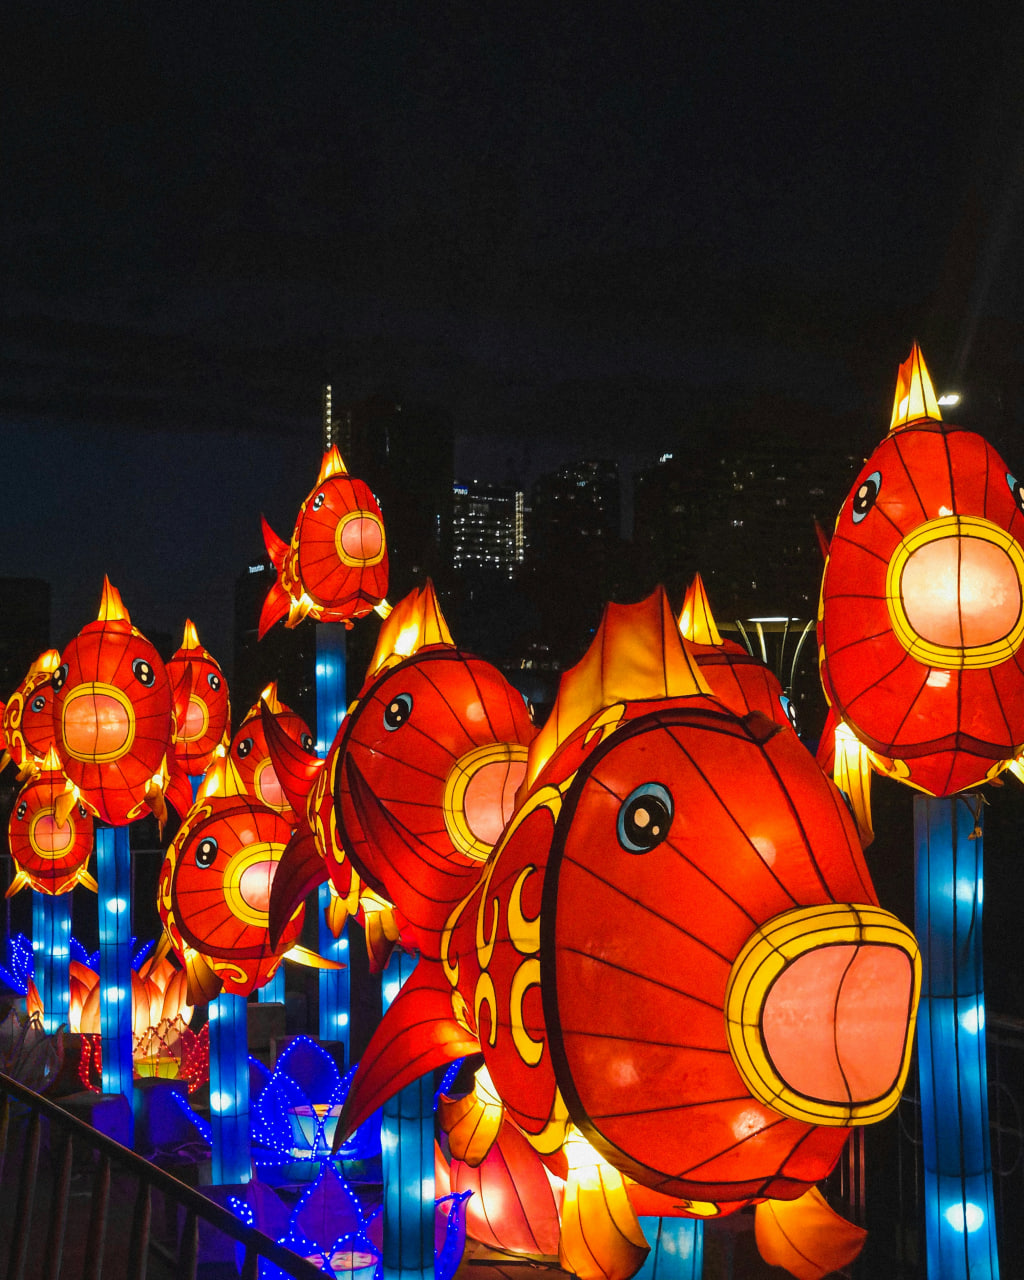 Fish symbolizes prosperity during the Lunar New Year